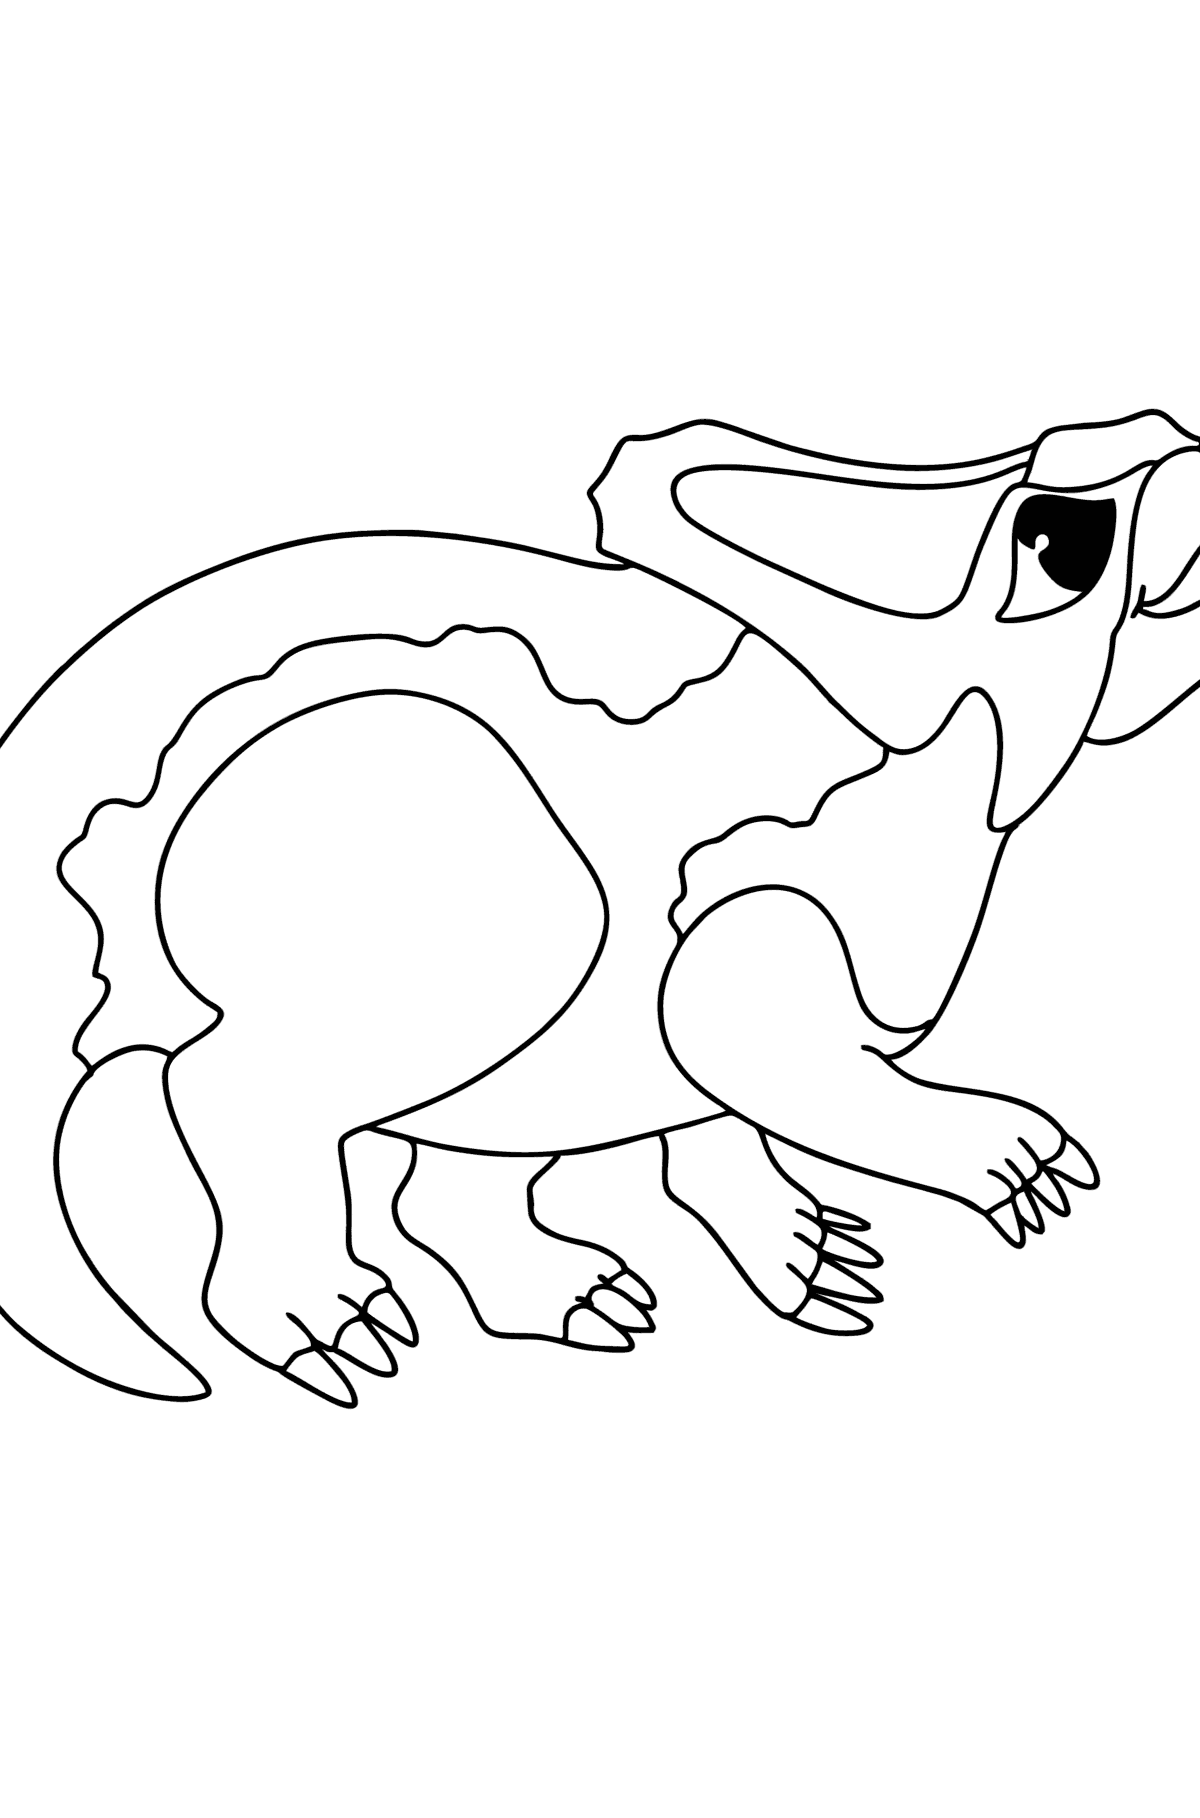 Protoceratops coloring page - Coloring Pages for Kids